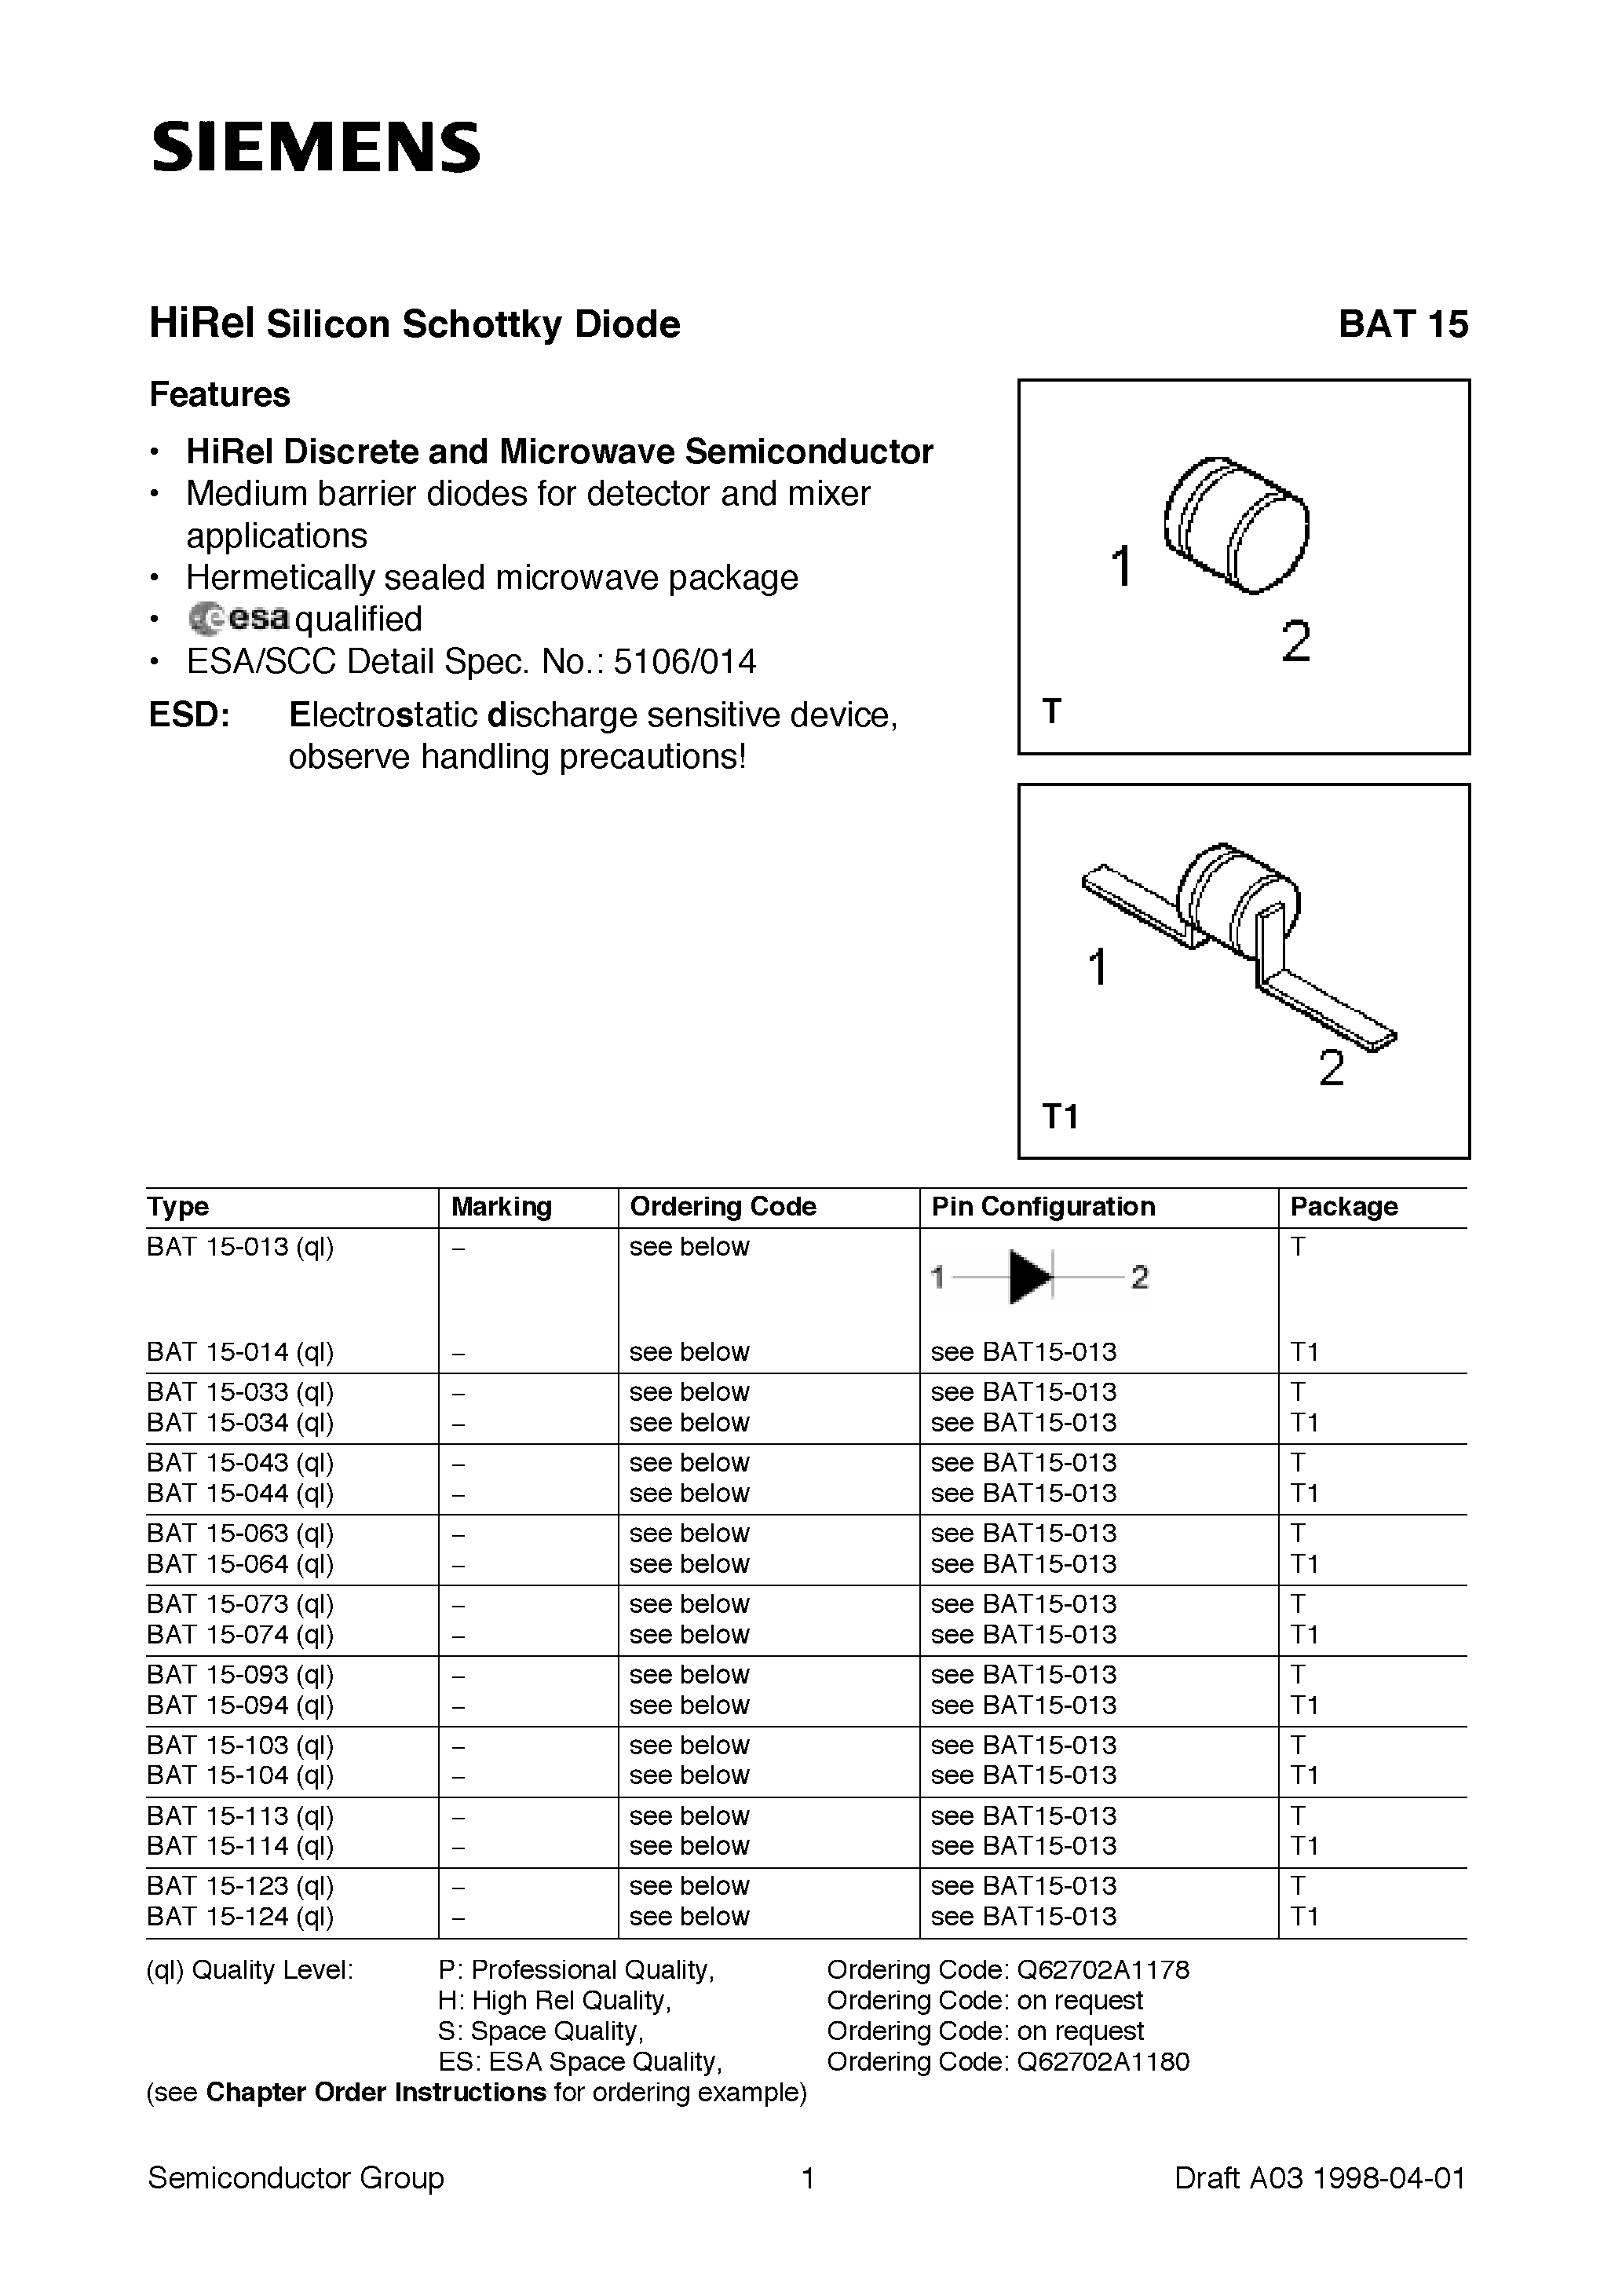 Datasheet BAT15-114 - HiRel Silicon Schottky Diode (HiRel Discrete and Microwave Semiconductor Medium barrier diodes for detector and mixer applications) page 1